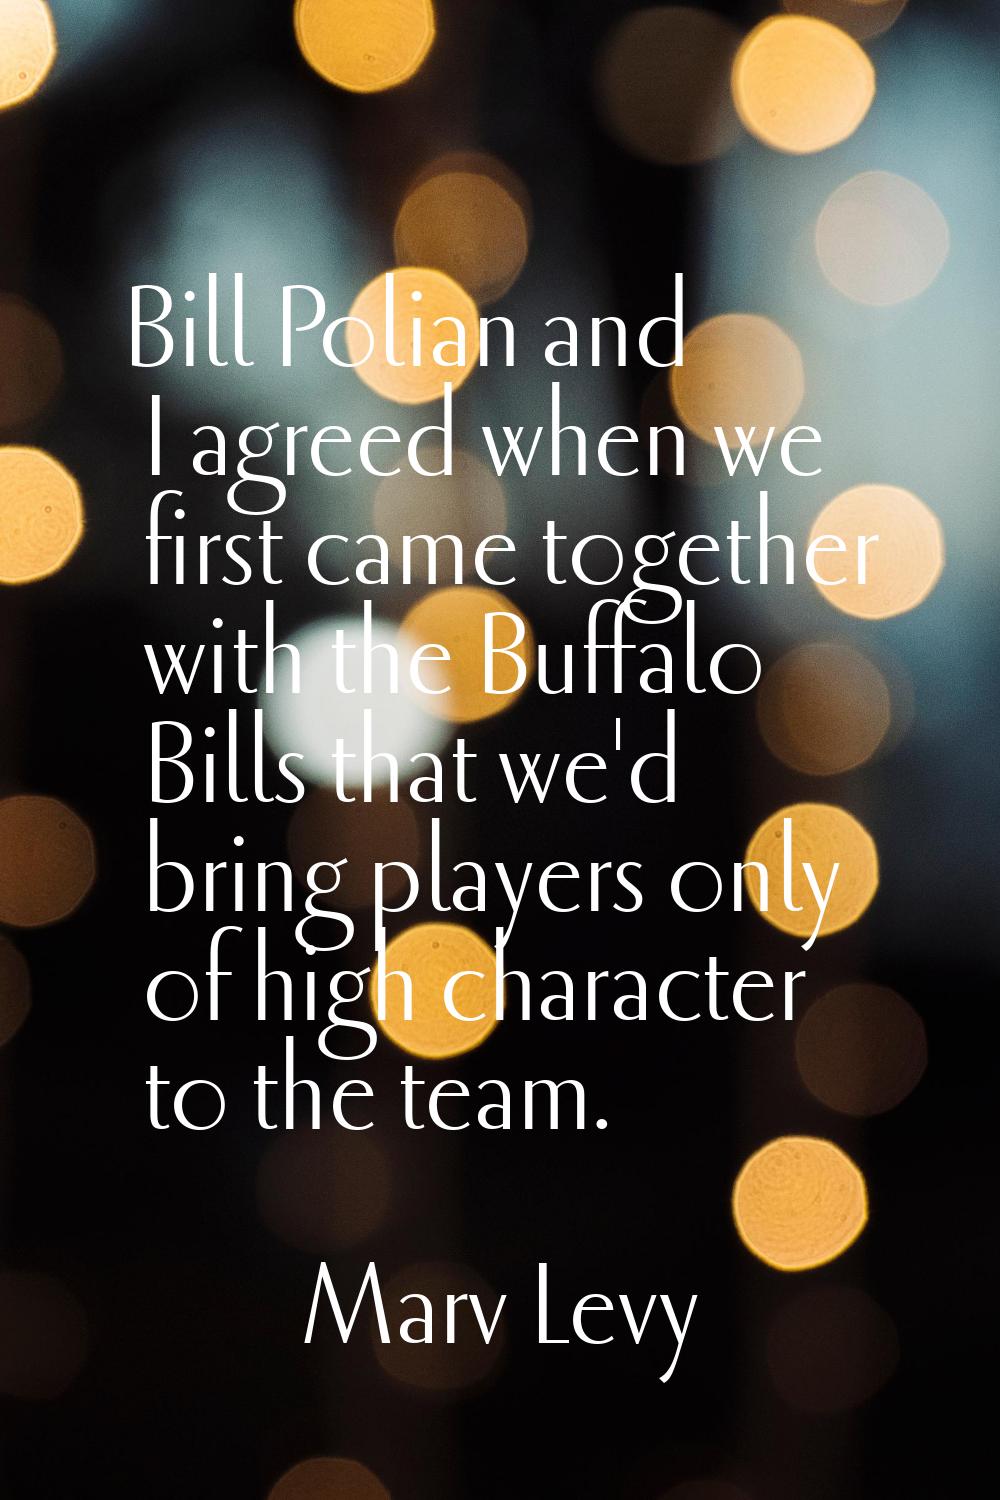 Bill Polian and I agreed when we first came together with the Buffalo Bills that we'd bring players